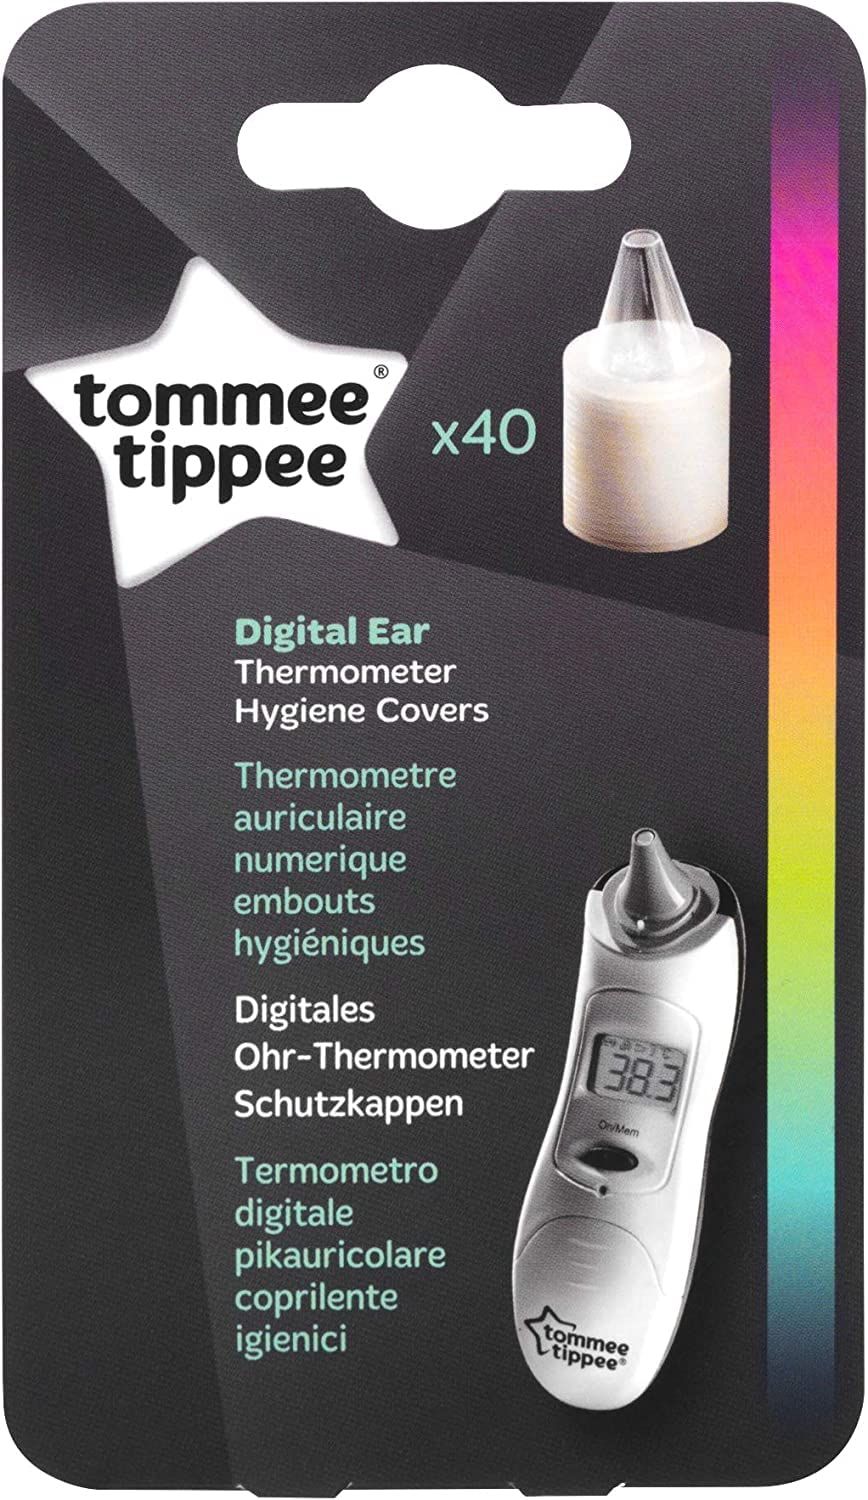 Tommee Tippee Digital Ear Thermometer Hygiene Covers - Pack of 40